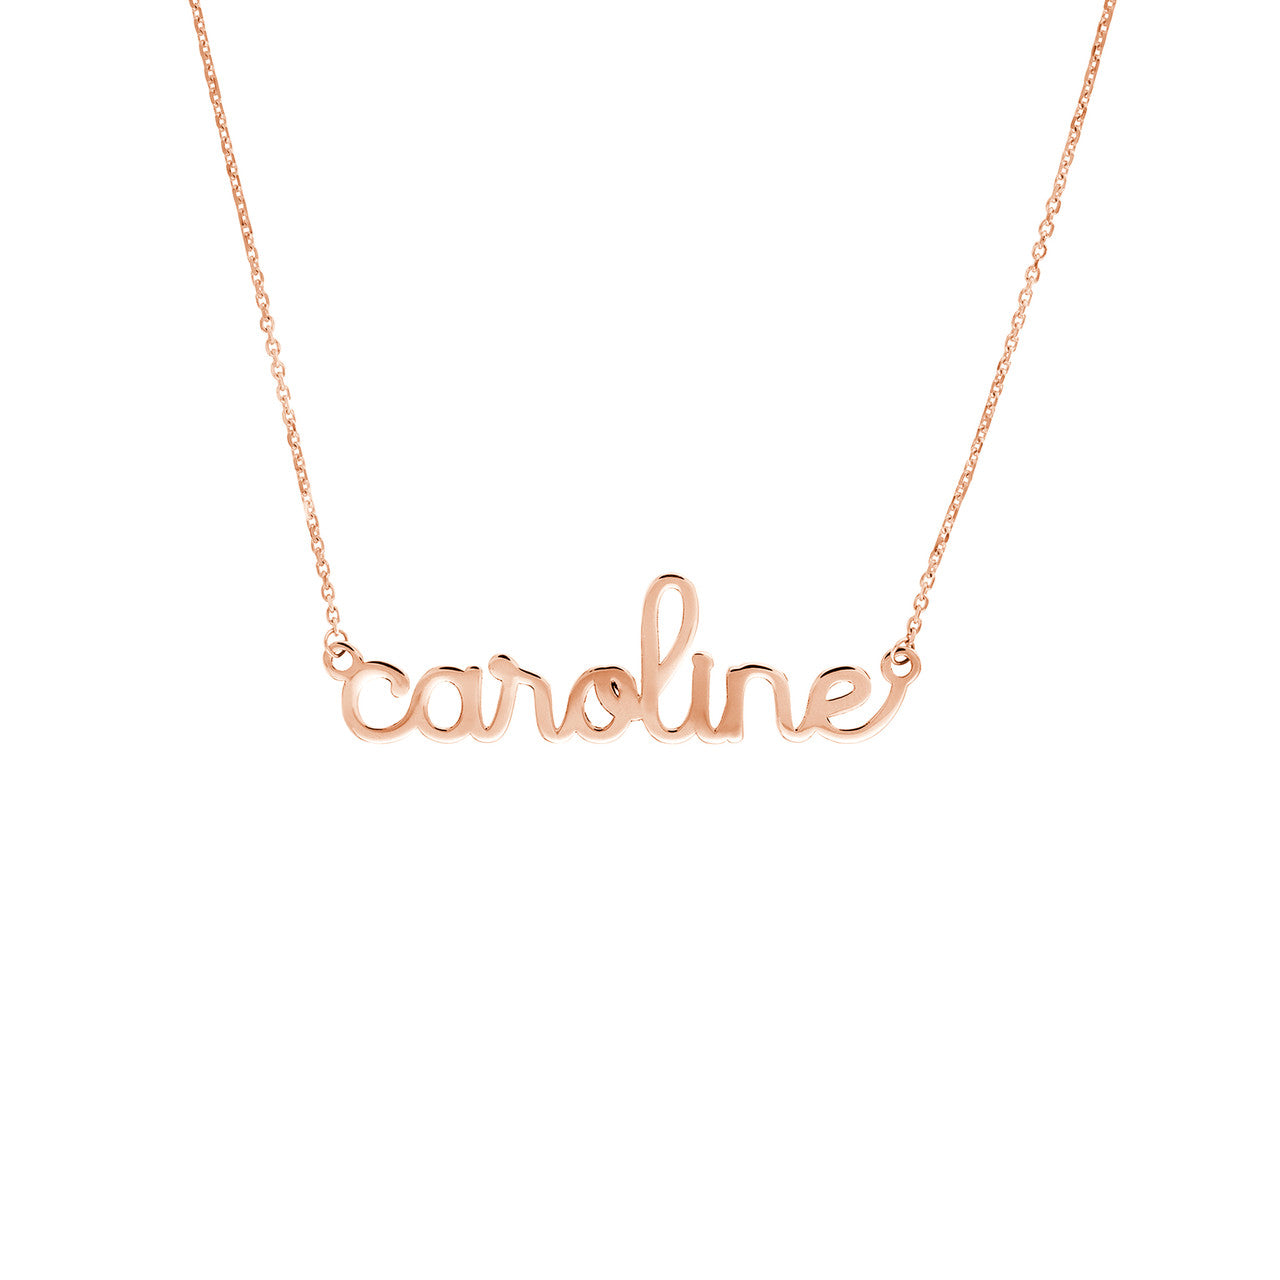 Doodle Name Necklace